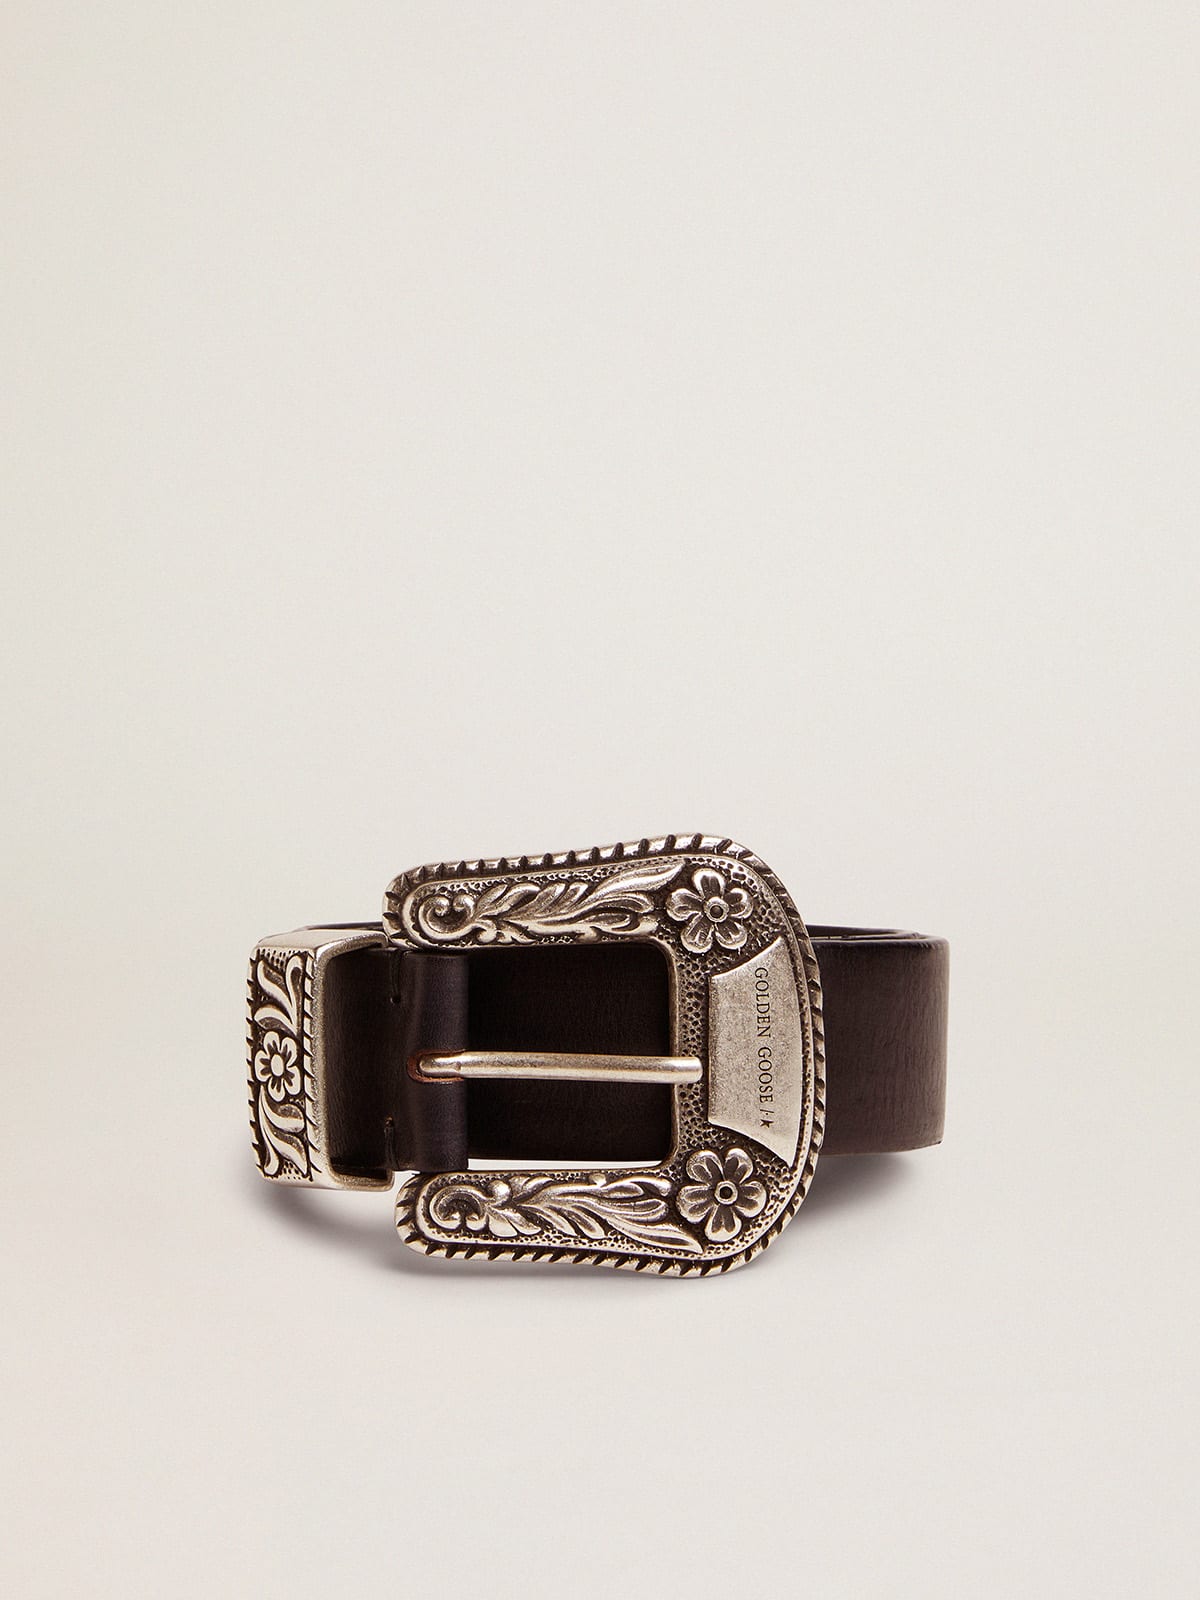 Lace belt in black leather with silver color decorated buckle